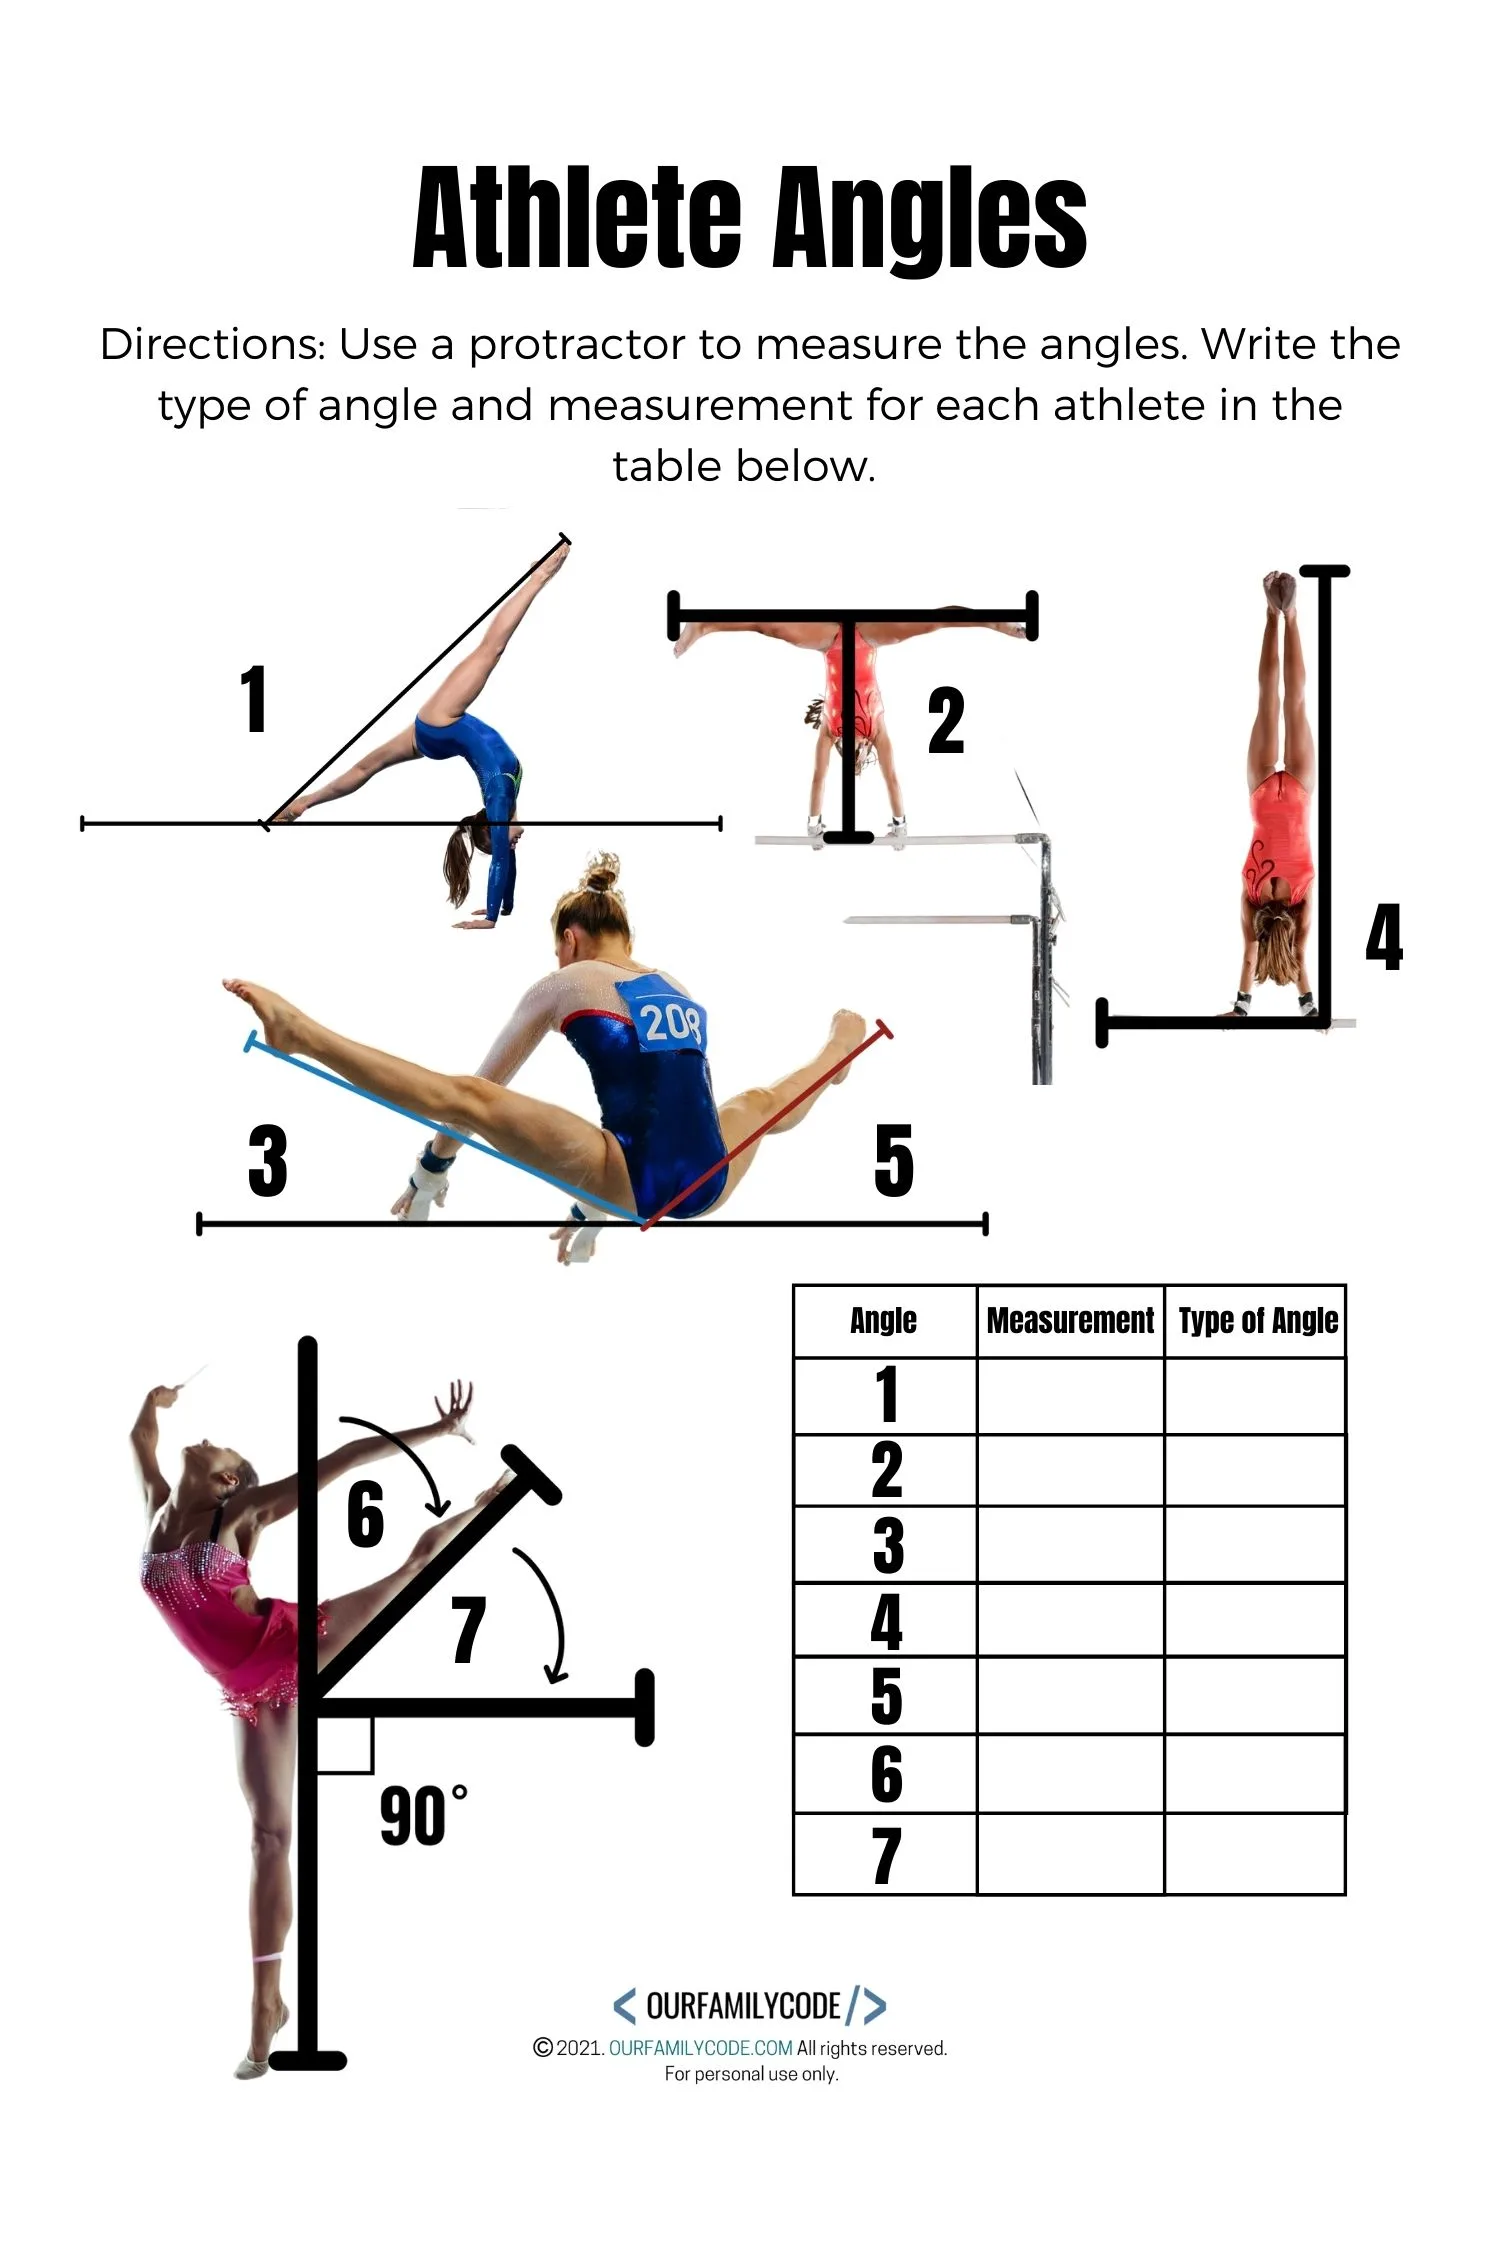 A picture of an athlete angle measurement worksheet to measure angles and identify types of angles used in gymnastics.